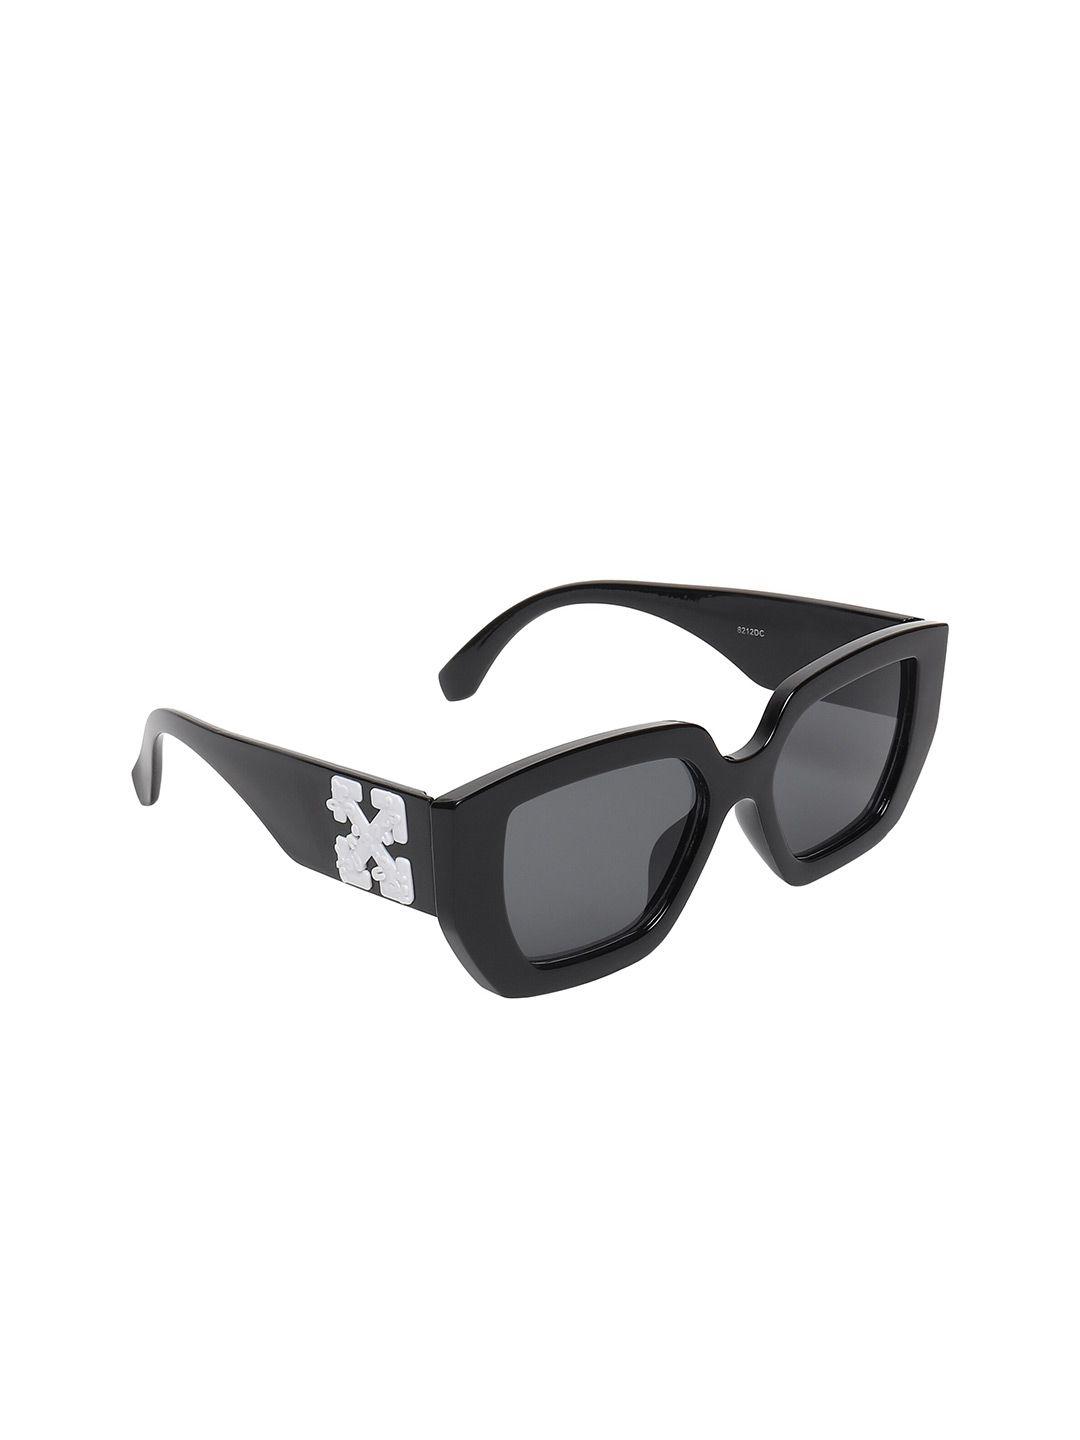 Swiss Design Unisex Lens & Square Sunglasses With UV Protected Lens